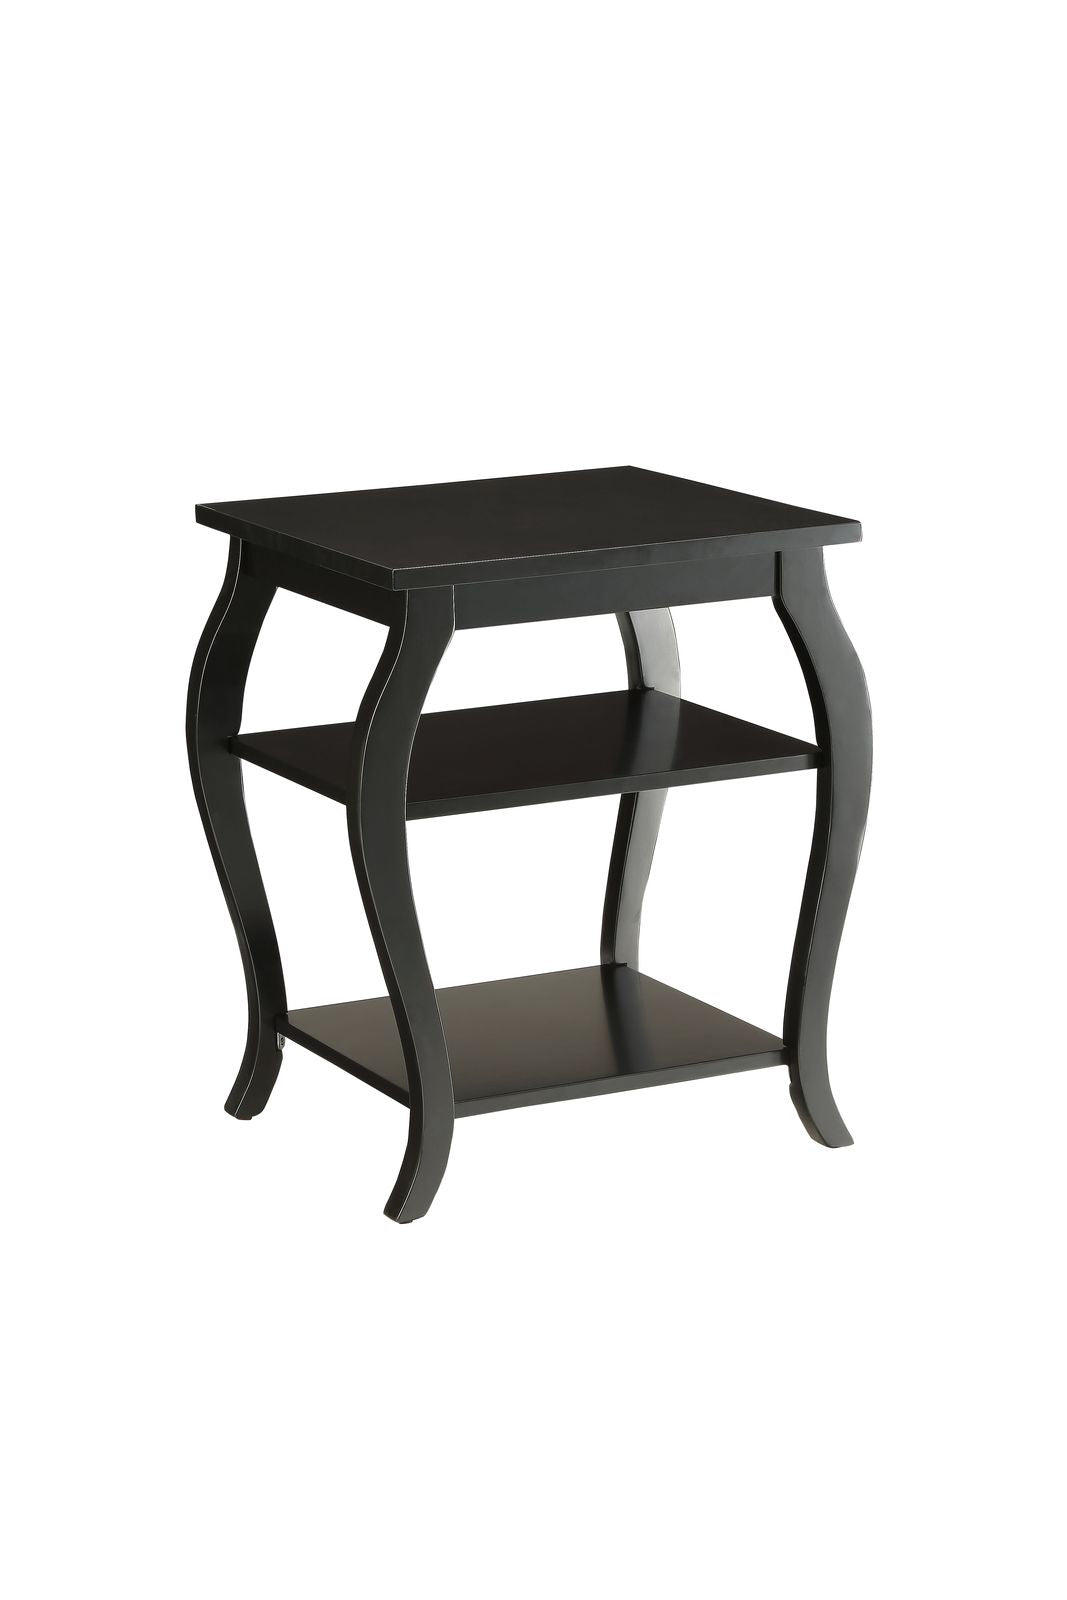 Becci End Table in Black - Demine Essentials